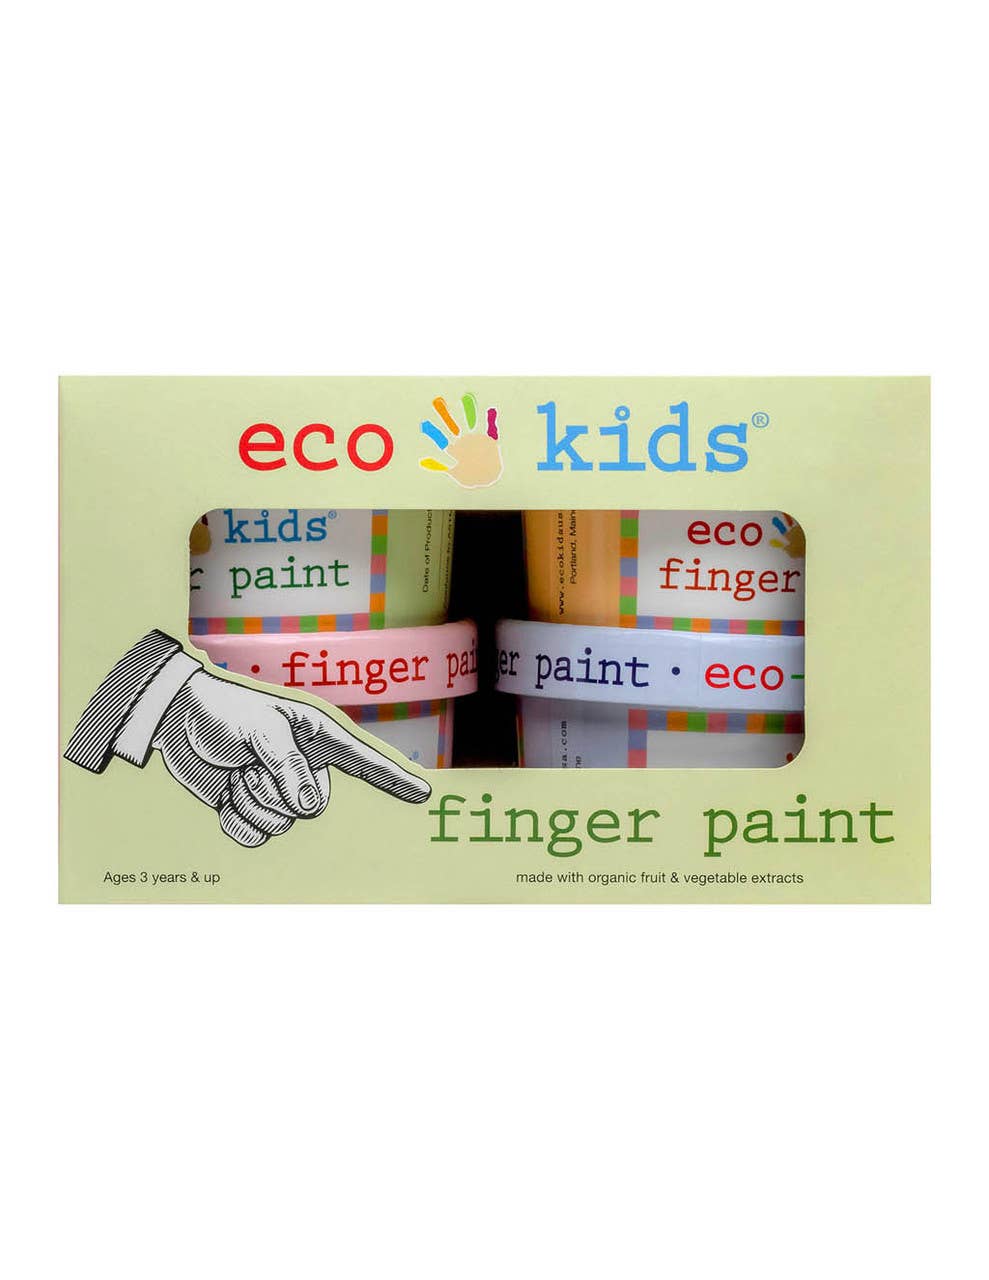 eco-friendly finger paint  eco-kids   -better made easy-eco-friendly-sustainable-gifting